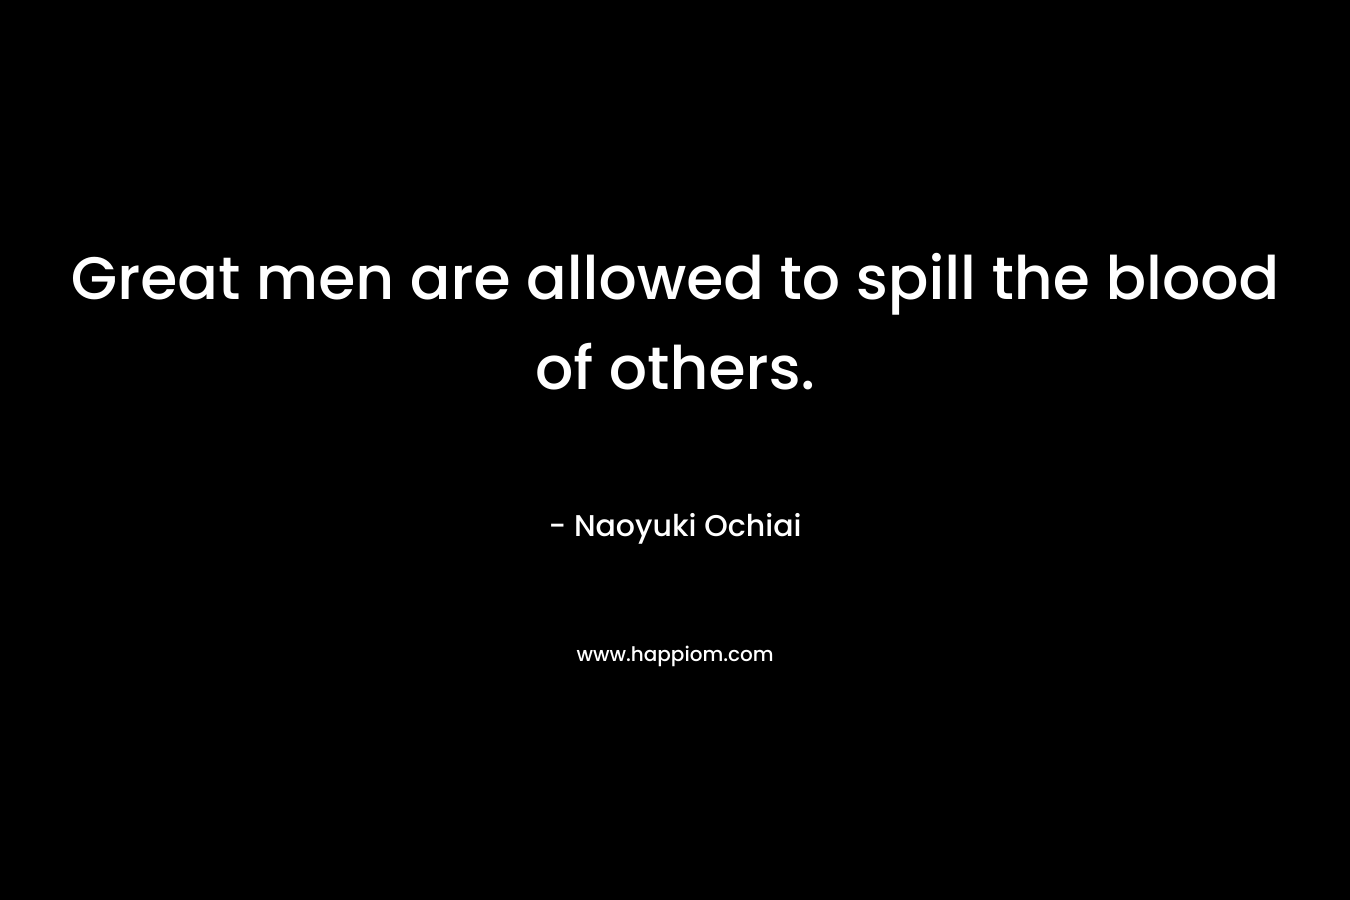 Great men are allowed to spill the blood of others. – Naoyuki Ochiai